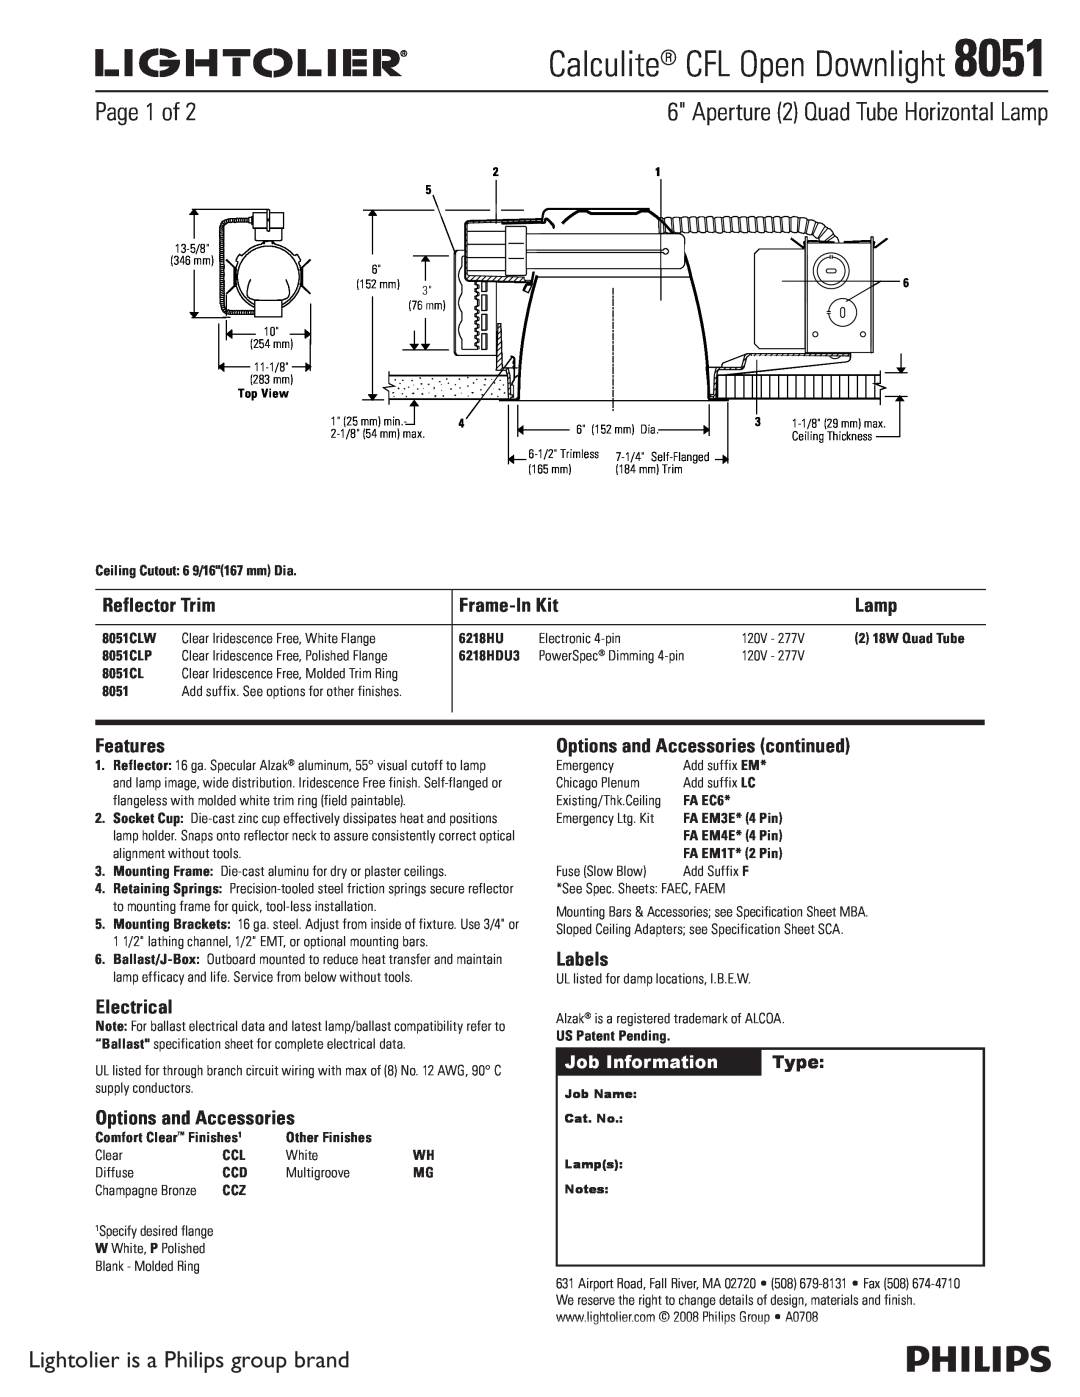 Lightolier 8051 specifications Calculite CFL Open Downlight, Aperture 2 Quad Tube Horizontal Lamp, Page 1 of, Frame-InKit 